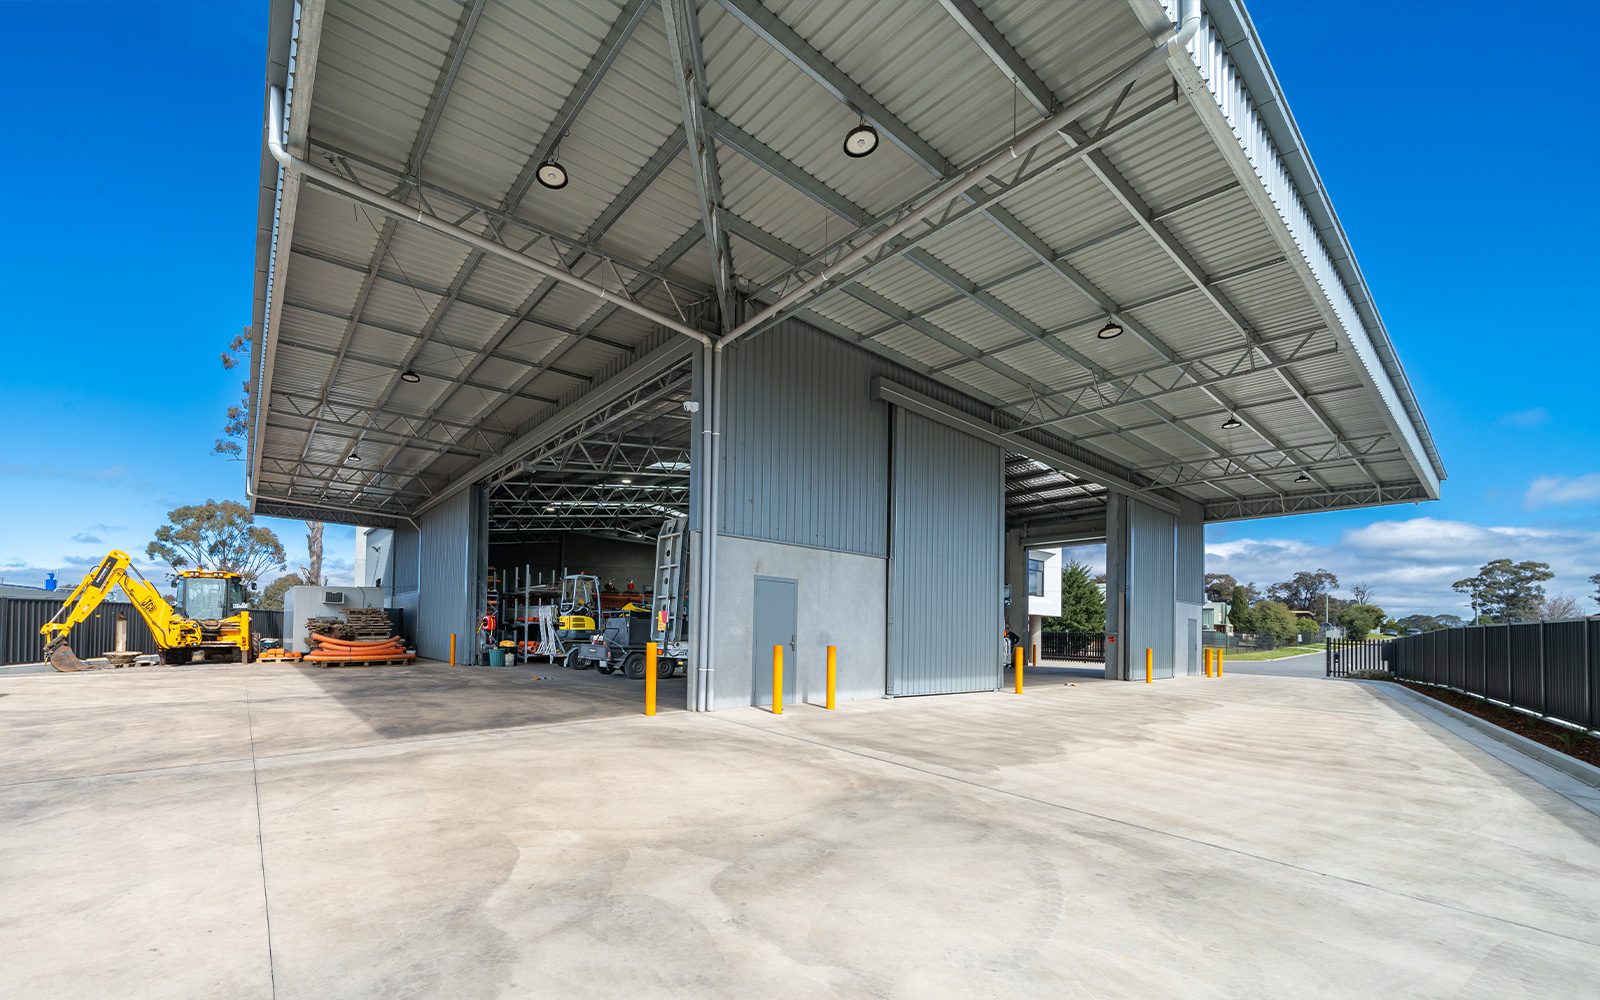 Pete Sens combined precast office and warehouse complex shed